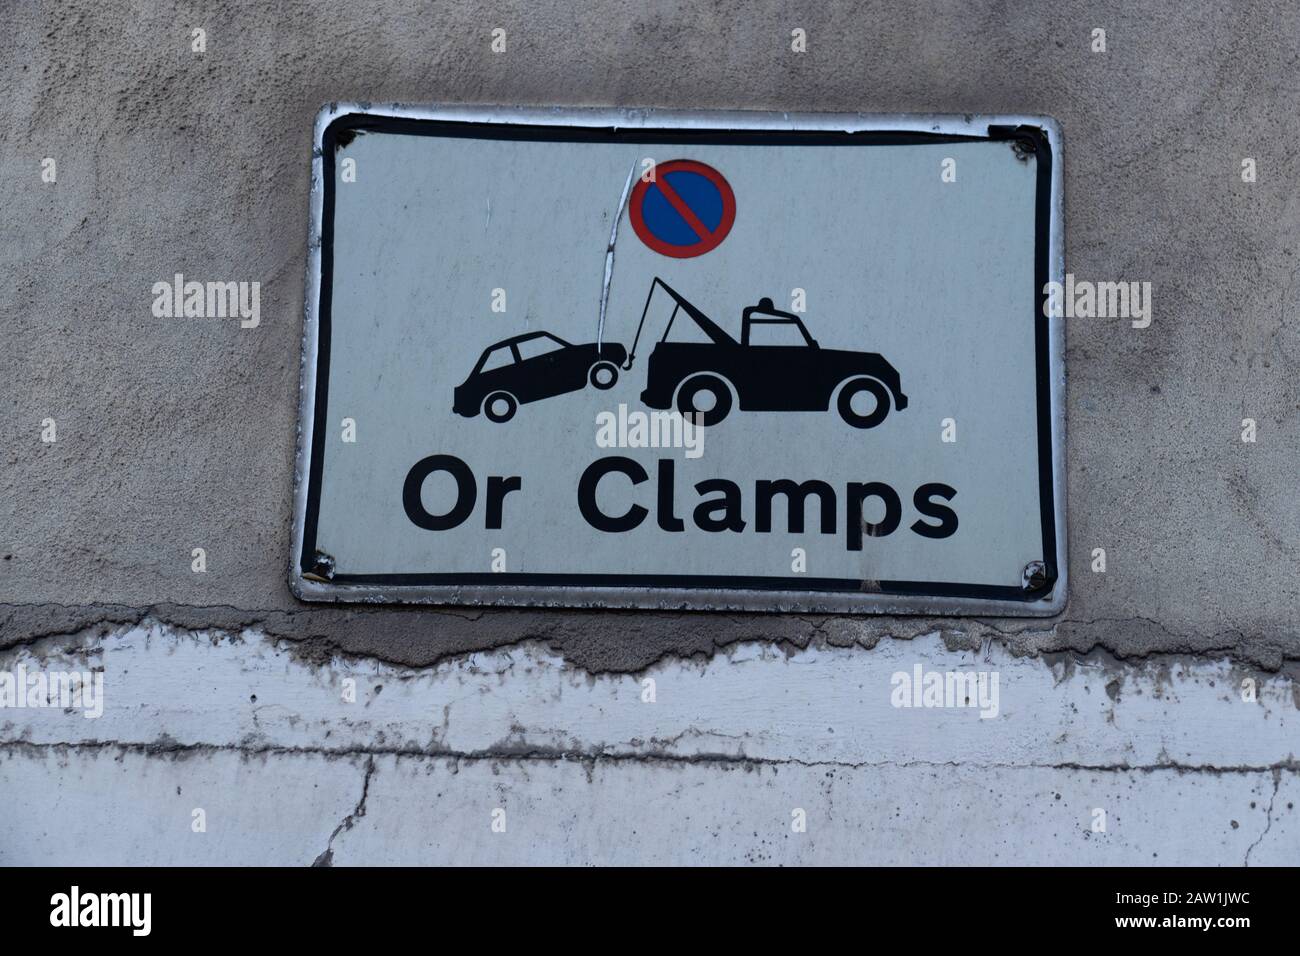 https://c8.alamy.com/comp/2AW1JWC/parking-forbidden-road-sign-on-a-wall-in-gibraltar-2AW1JWC.jpg